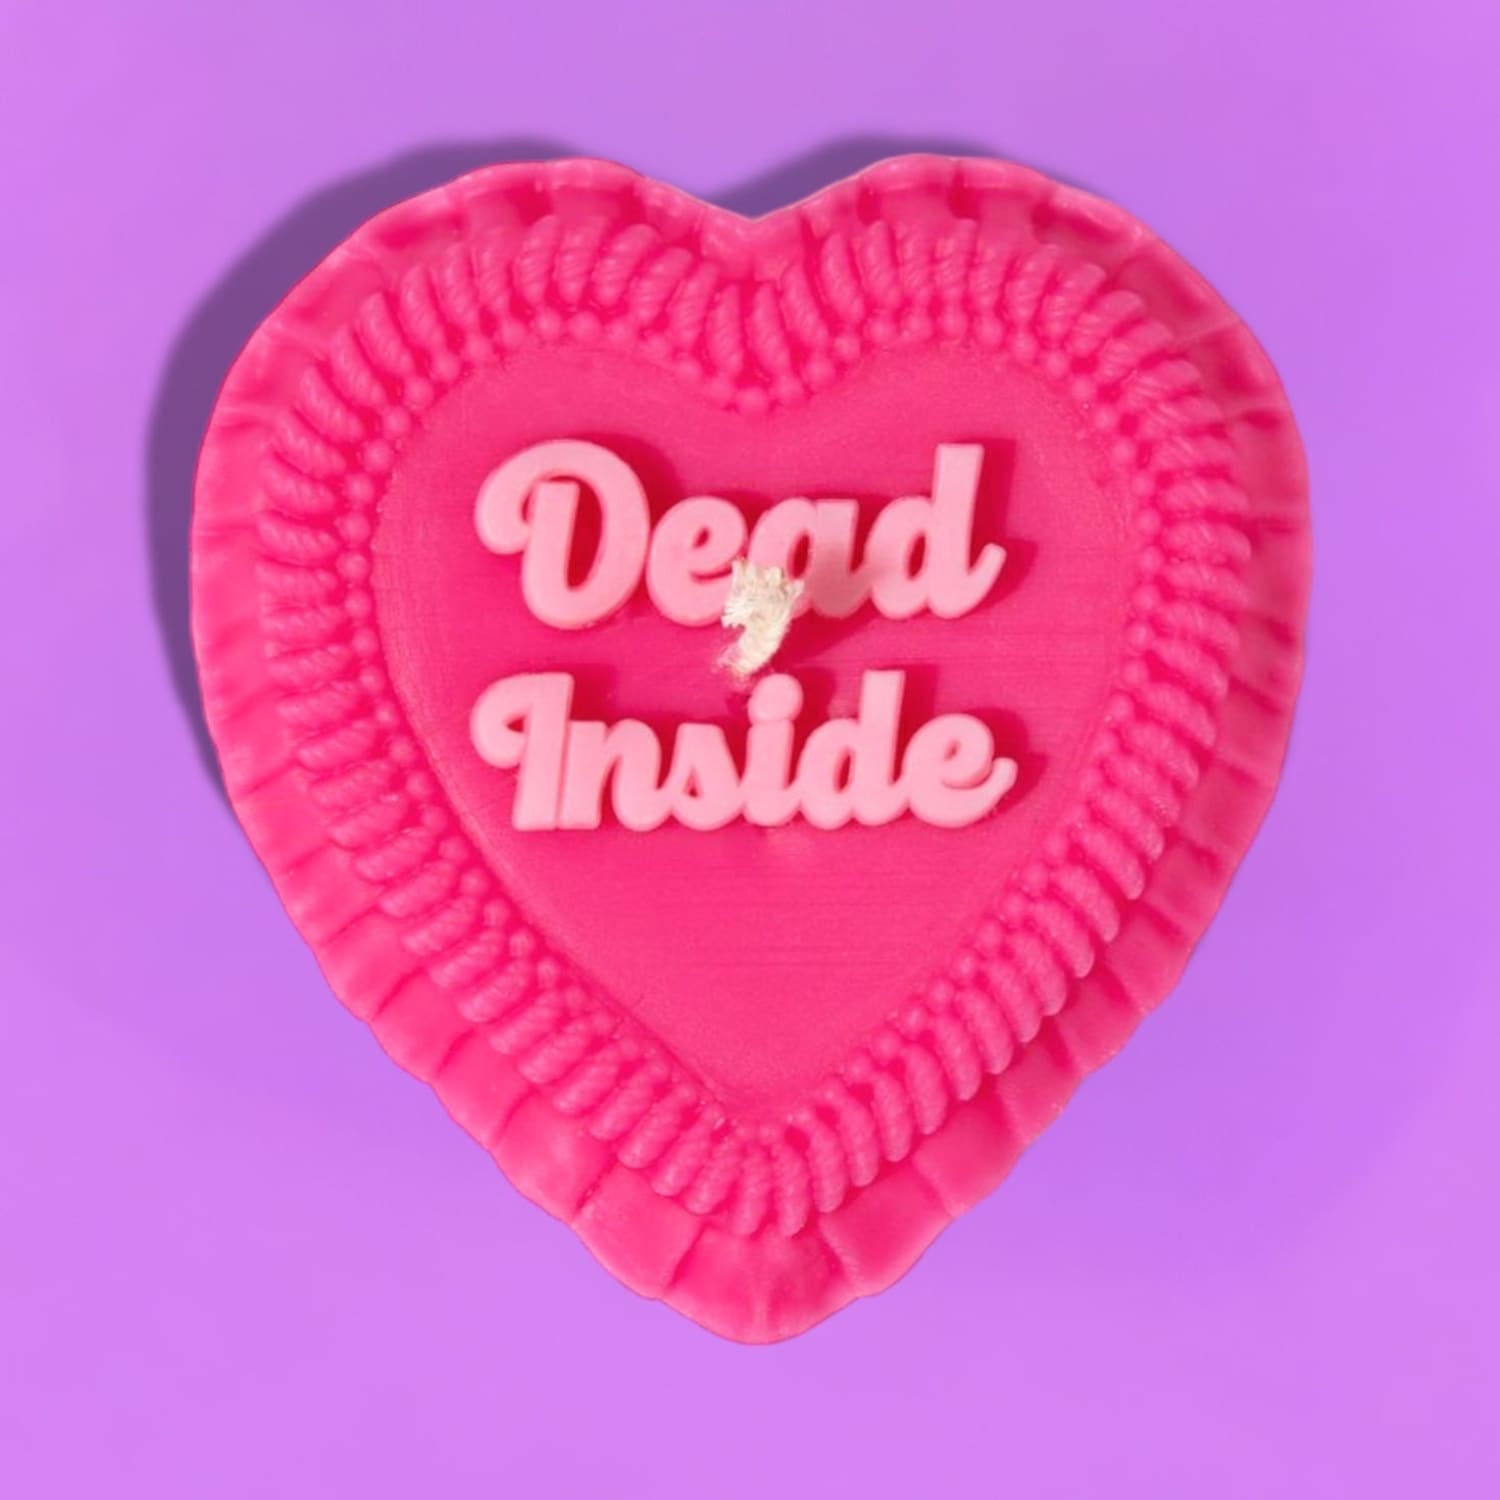 Dead Inside Heart Cake Candle Anniversary Gifts - Boxed